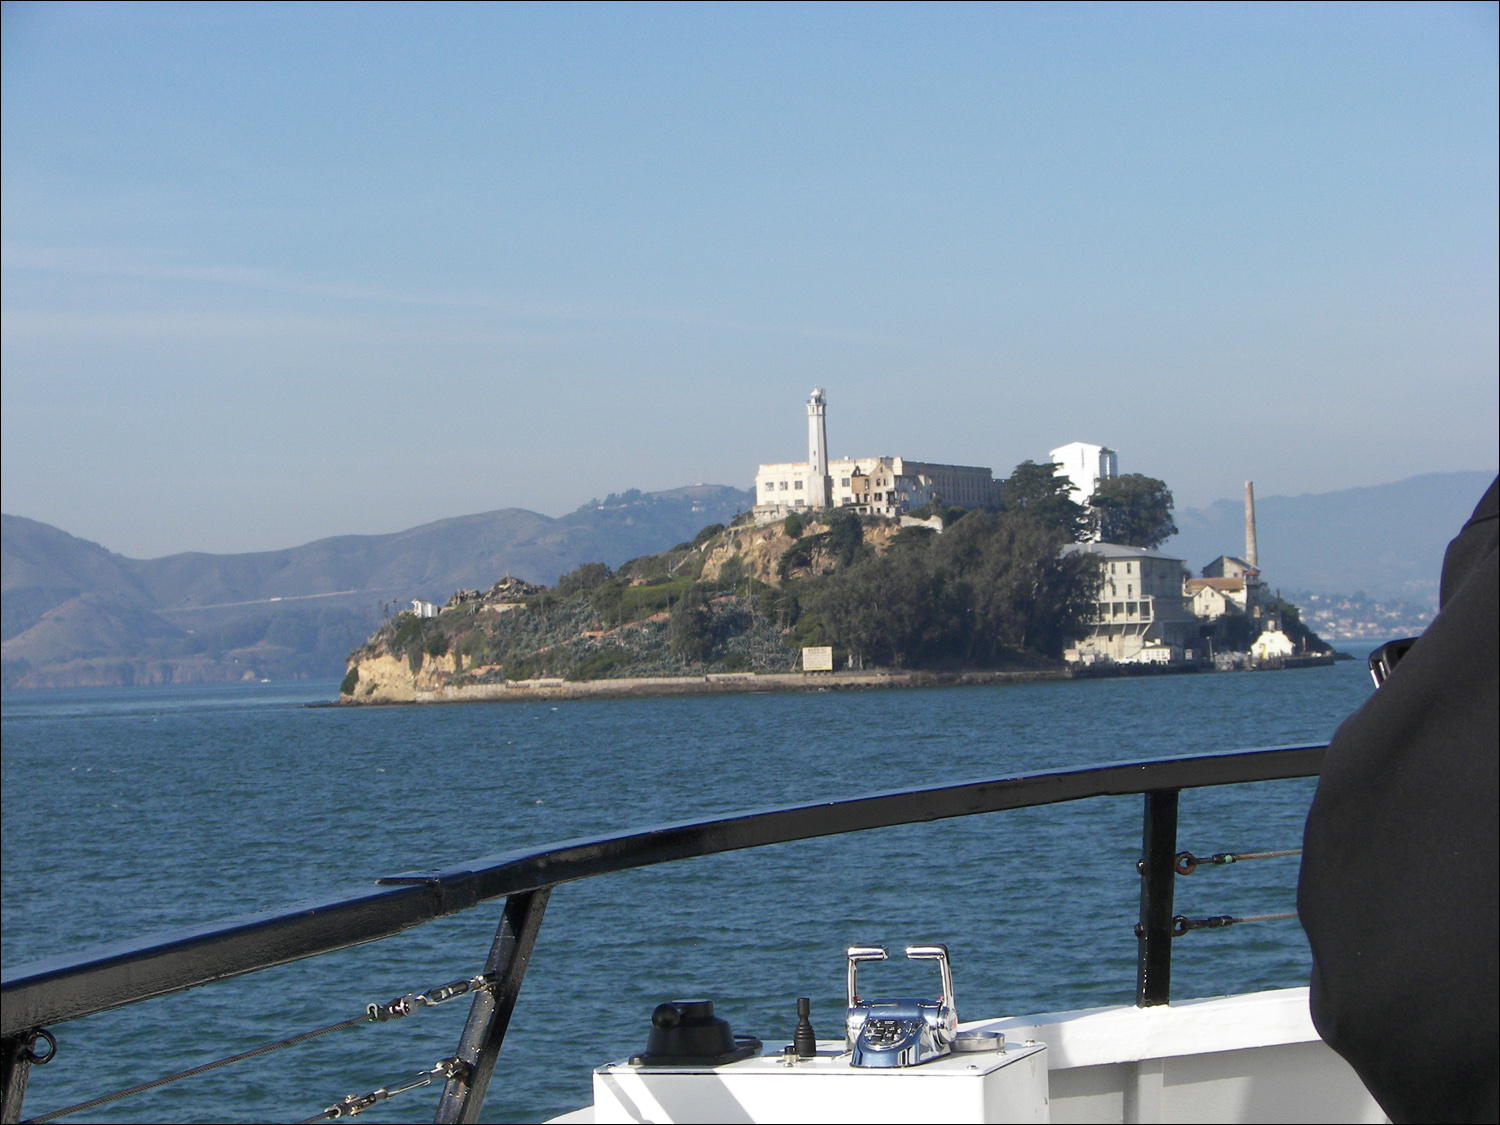 View of Alcatraz from ferry